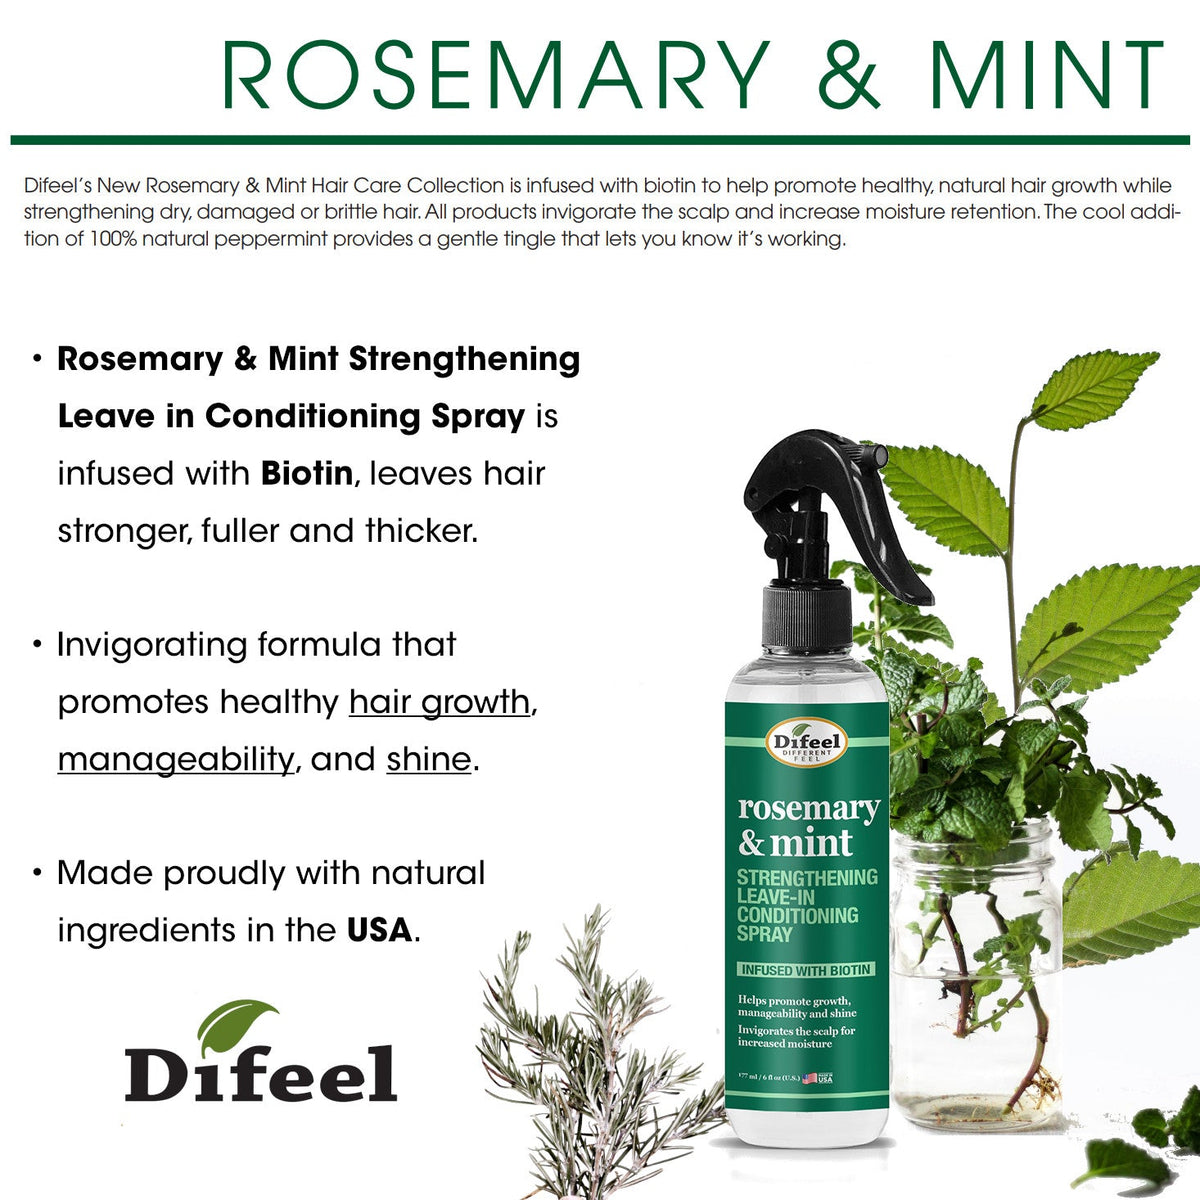 Difeel Rosemary and Mint Strengthening Leave-In Conditioning Spray with Biotin 6 oz. by difeel - find your natural beauty